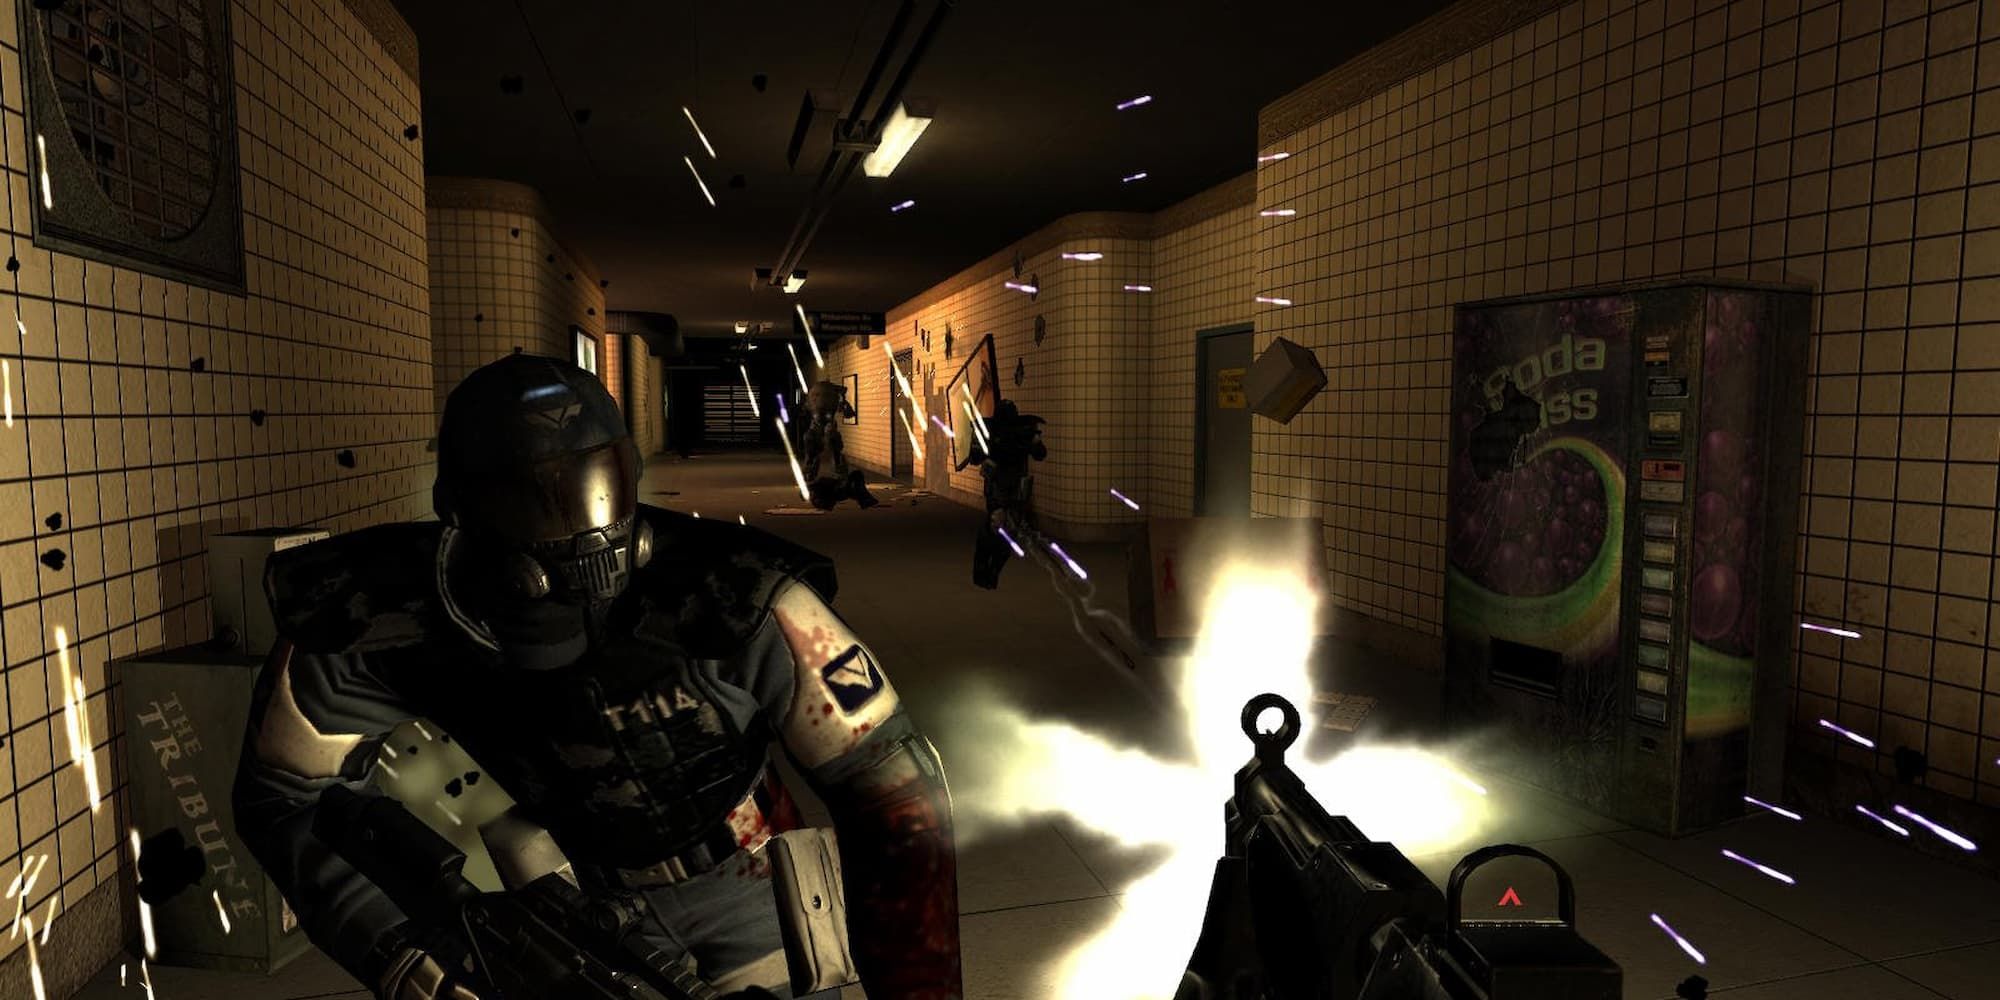 A player with an assault rifle enters a gunfight with enemy soldiers in a corridor of a building in Fear.